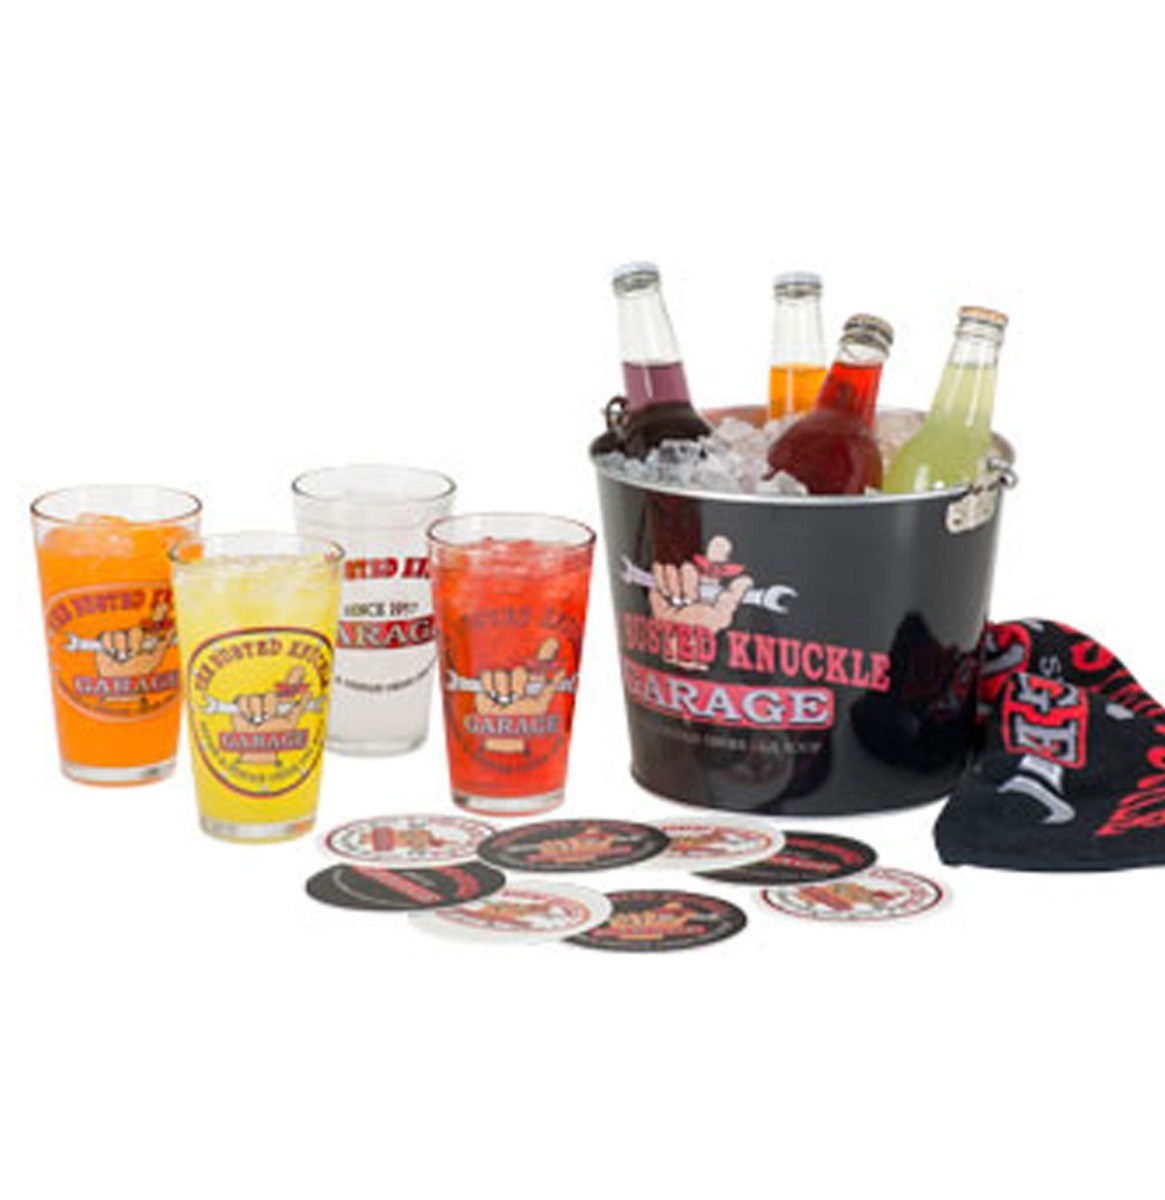 The Busted Knuckle Garage Pint Glass Party Bucket Set